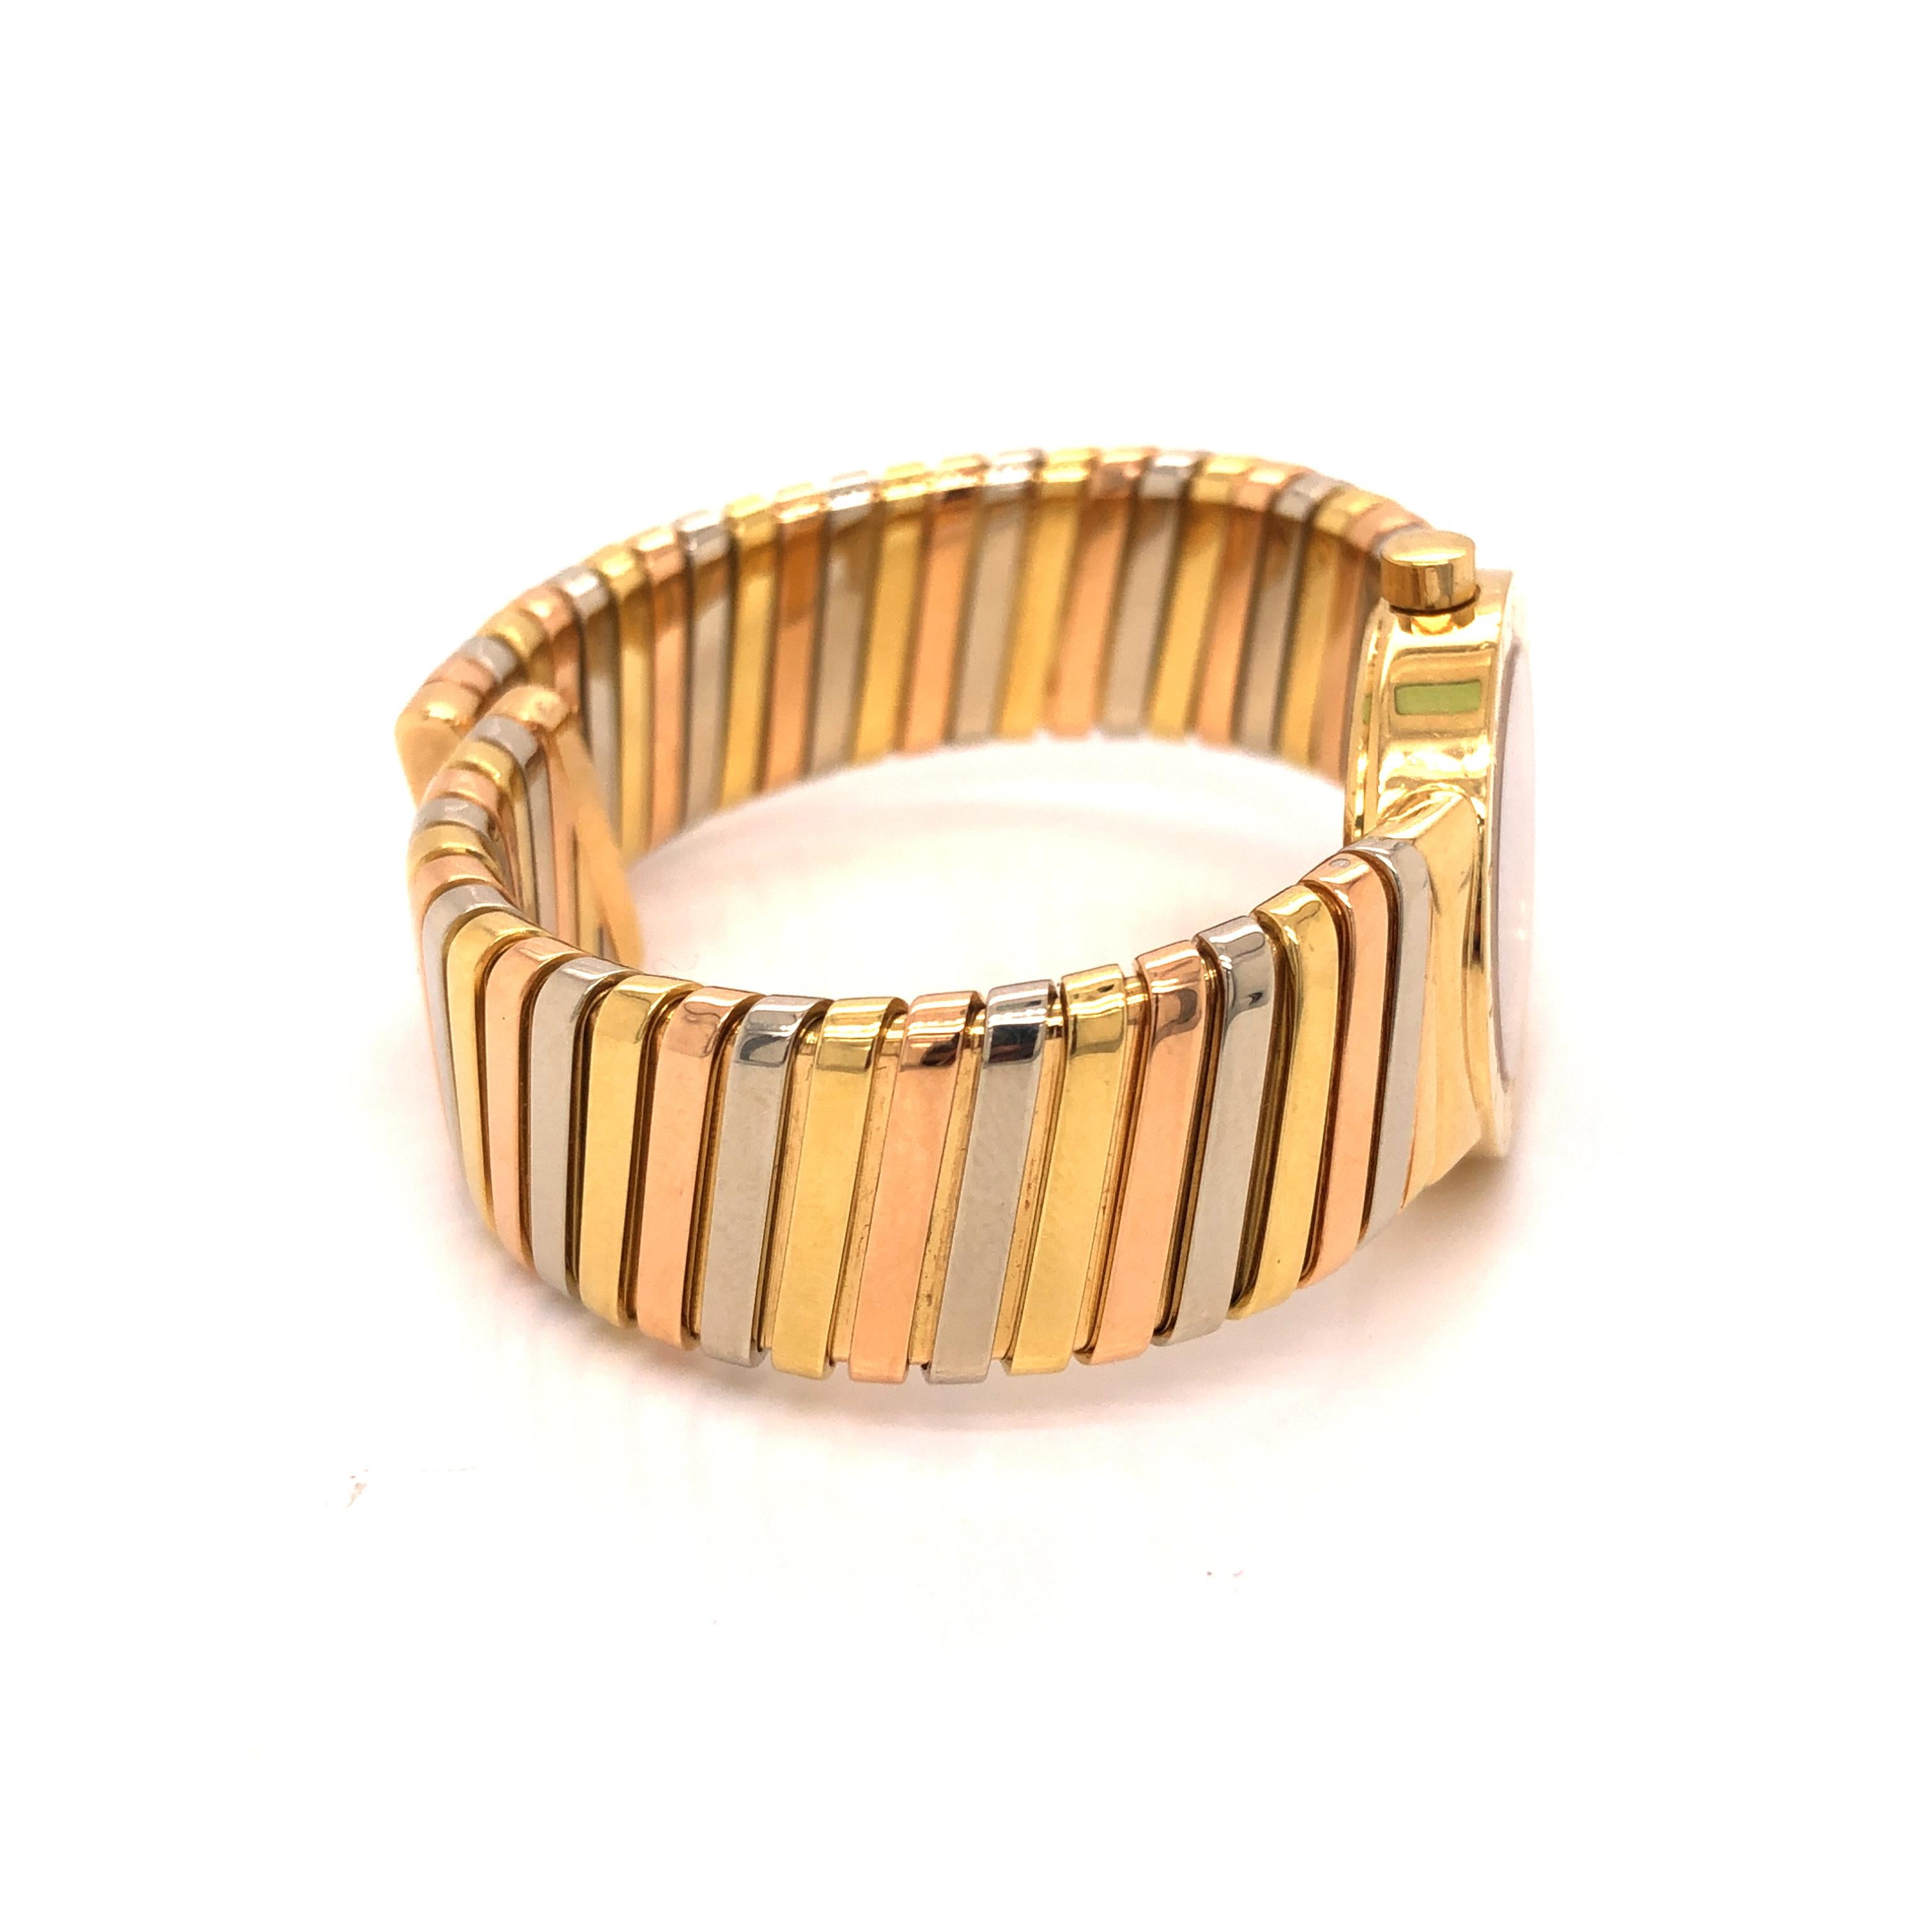 Bvlgari 18 Karat White and Yellow Gold Watch In Good Condition For Sale In New York, NY